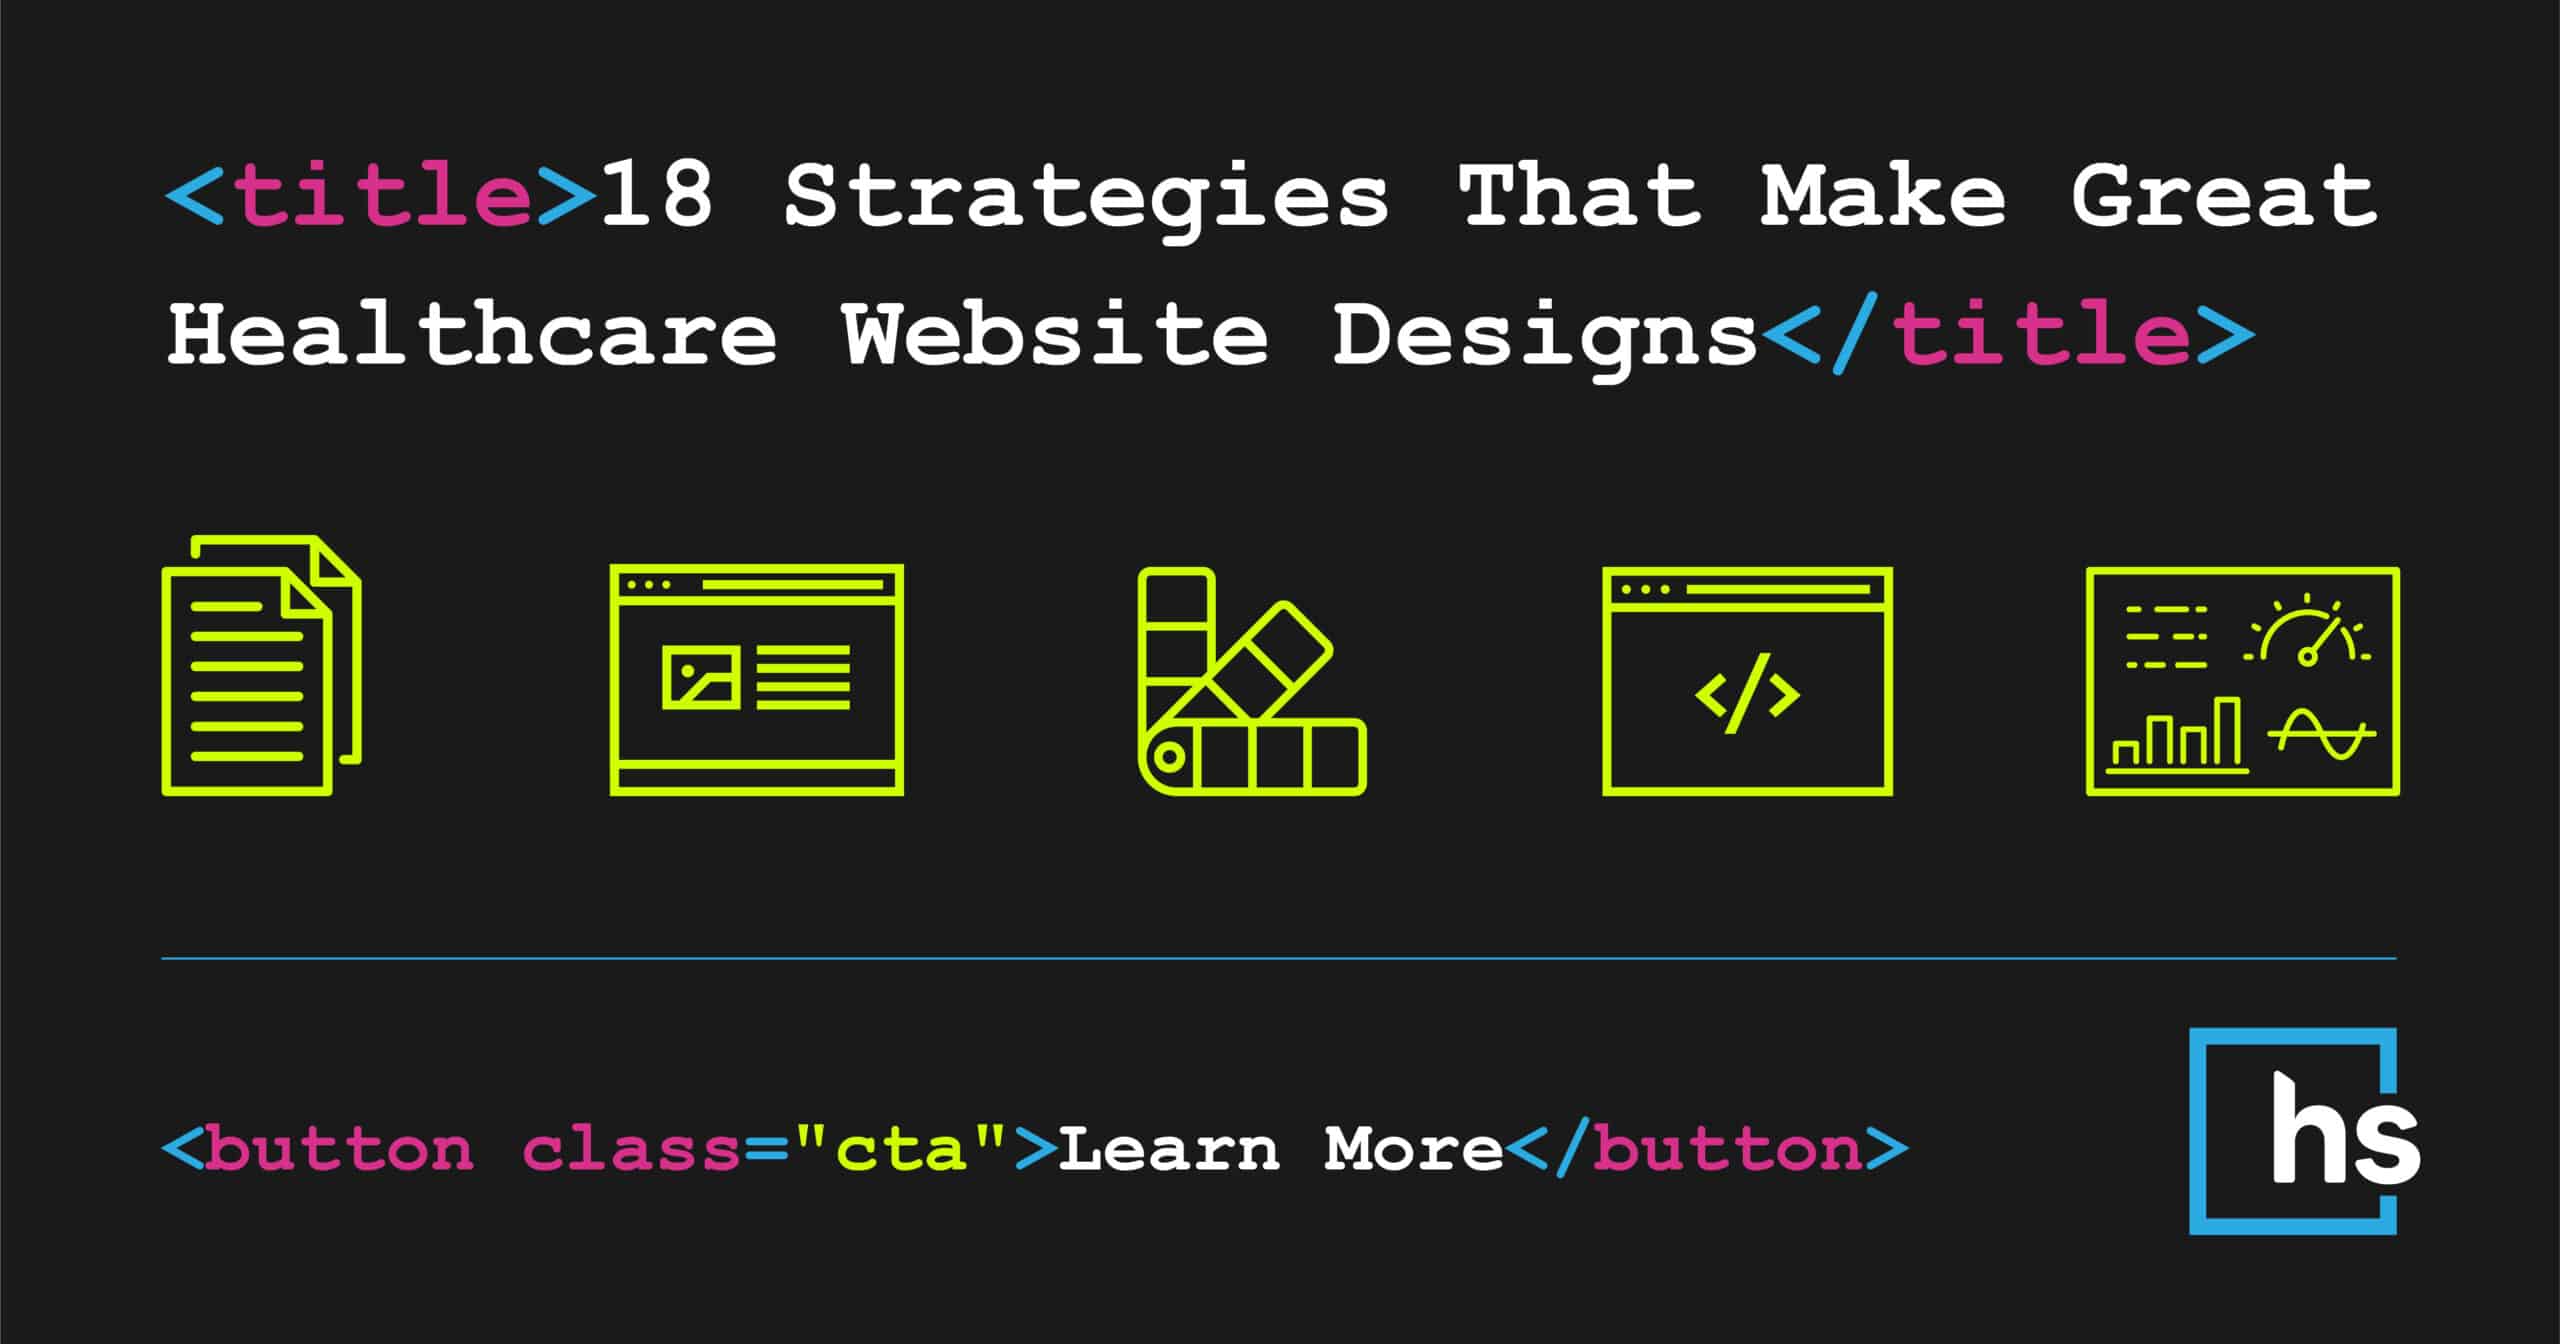 18 Strategies That Make for Great Healthcare Website Designs